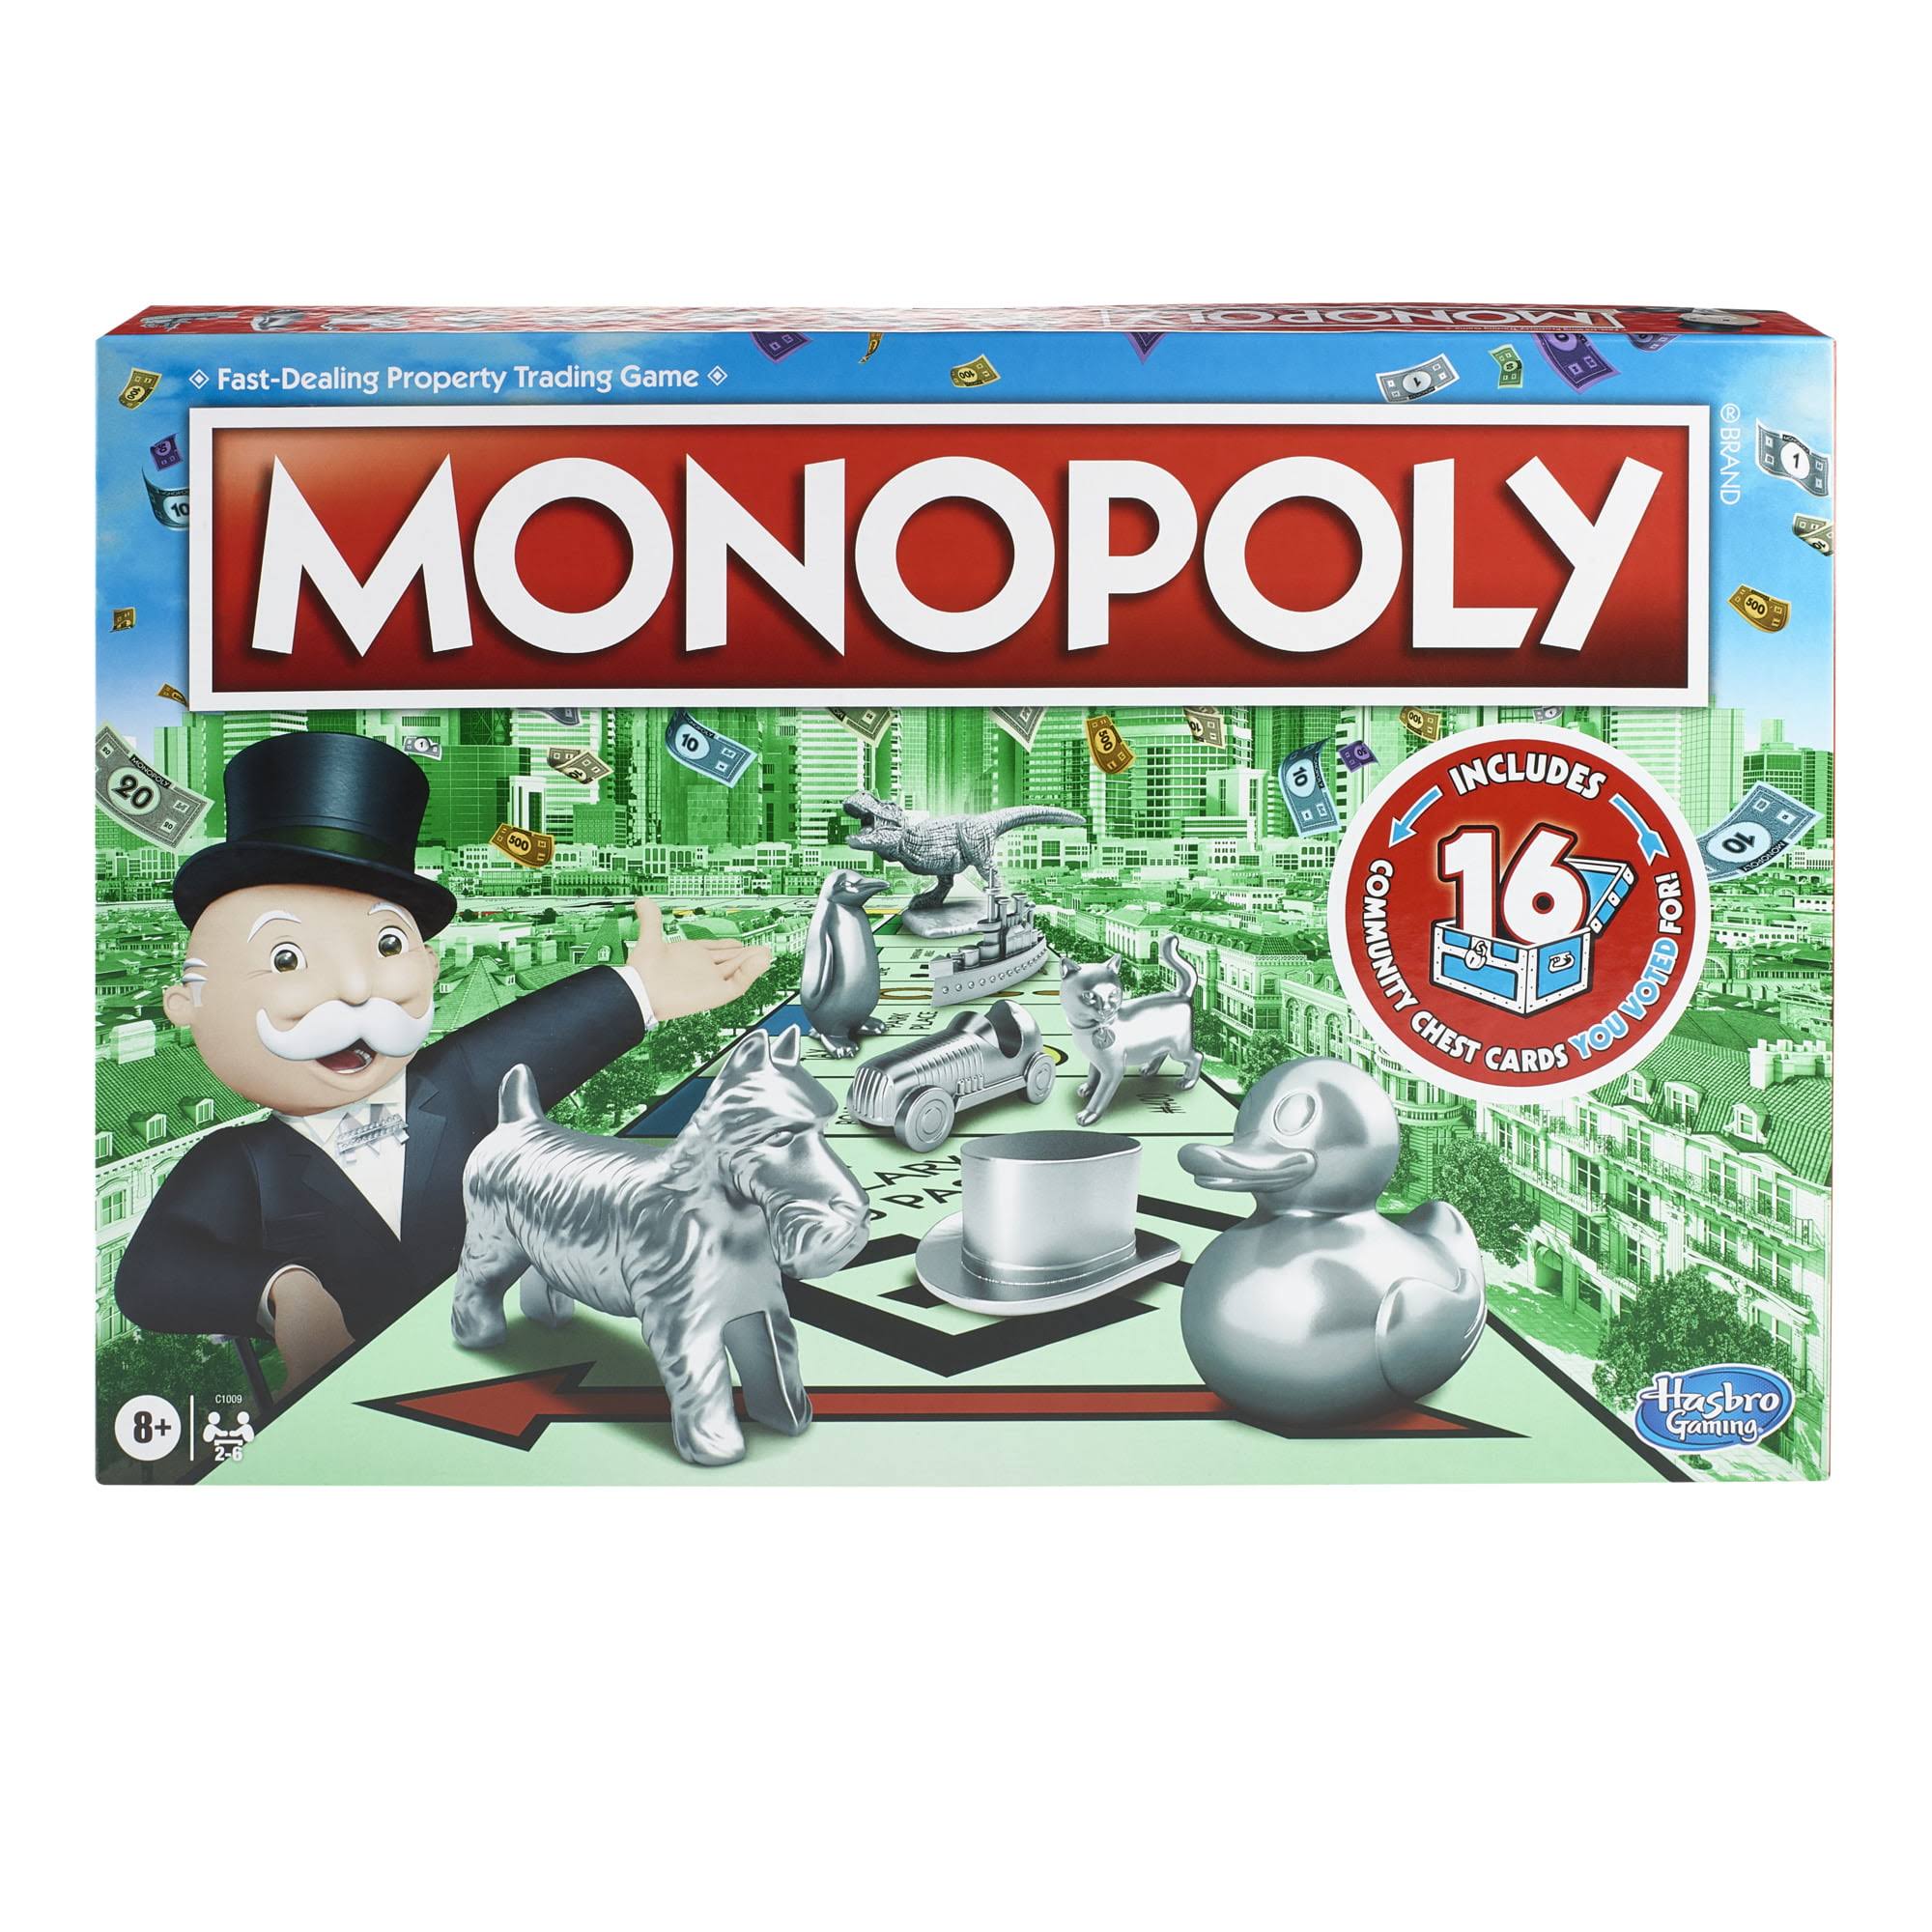 Monopoly Game, Family Board Game for 2 To 6 Players, Board Game for